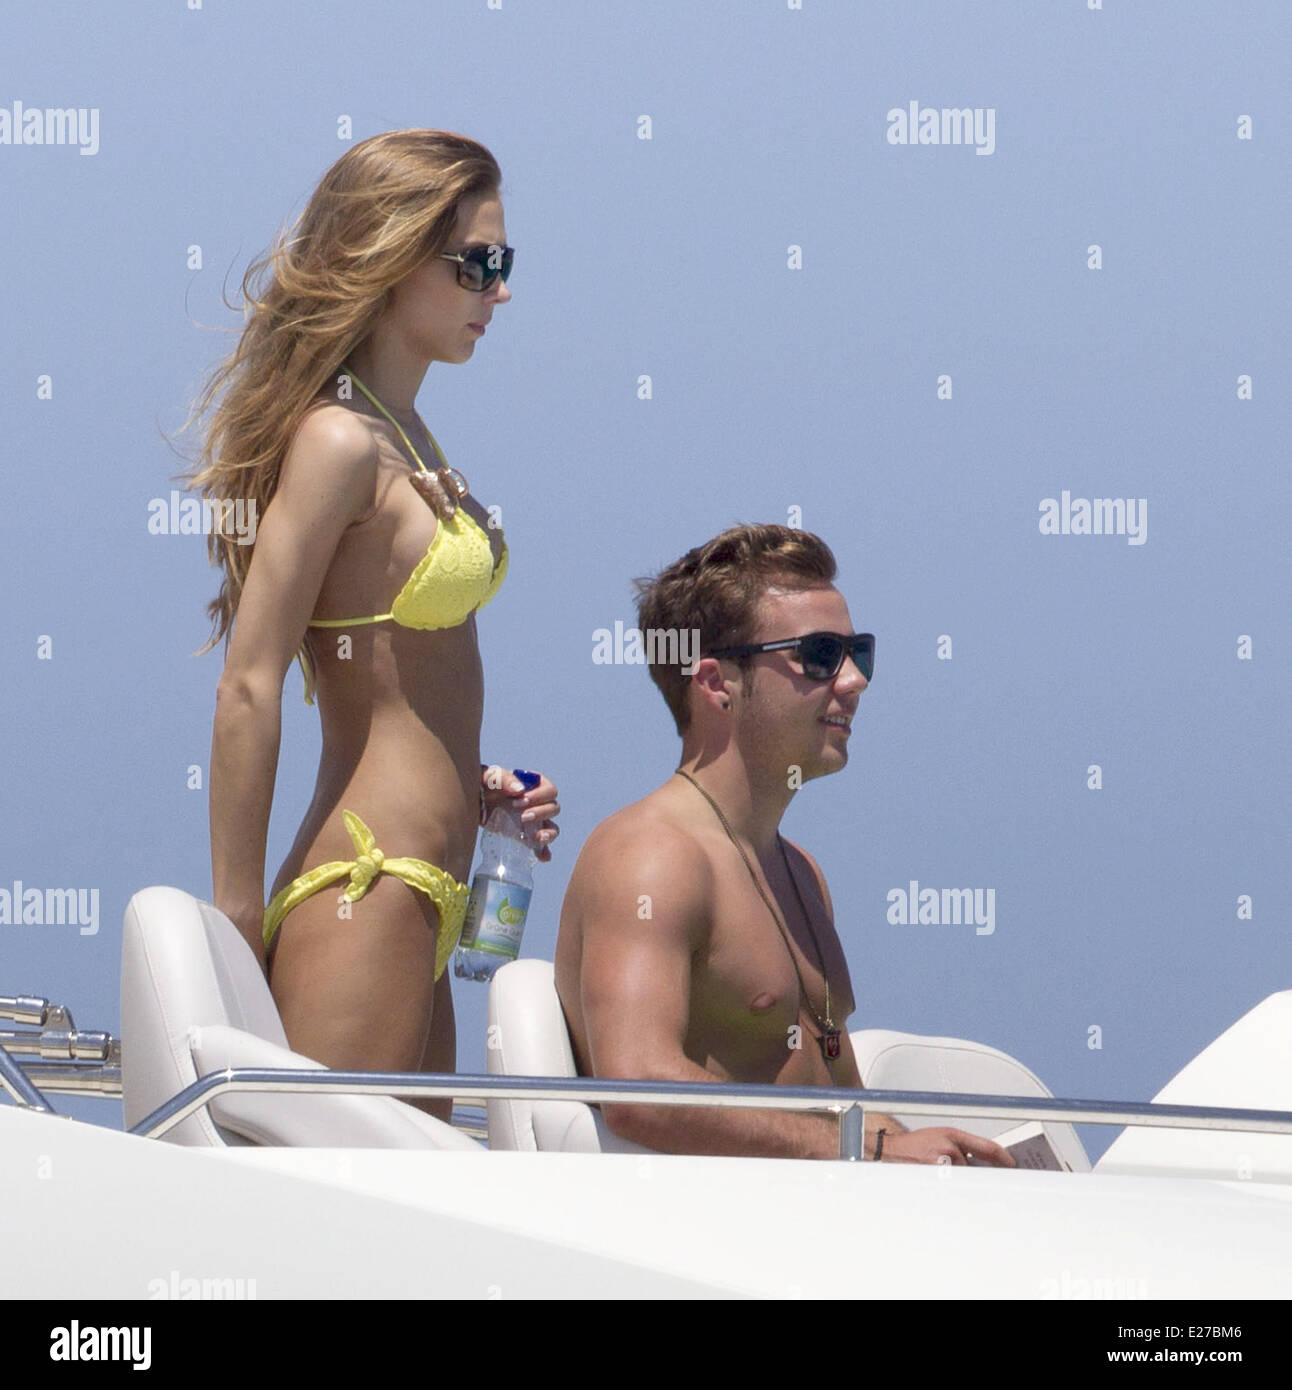 German footballer Mario Gotze and his model girlfriend Ann Kathrin Vida  enjoying the sunshine and sea on a yacht, while on holiday in Ibiza  Featuring: Mario Gotze,Ann Kathrin Vida Where: Ibiza, Spain